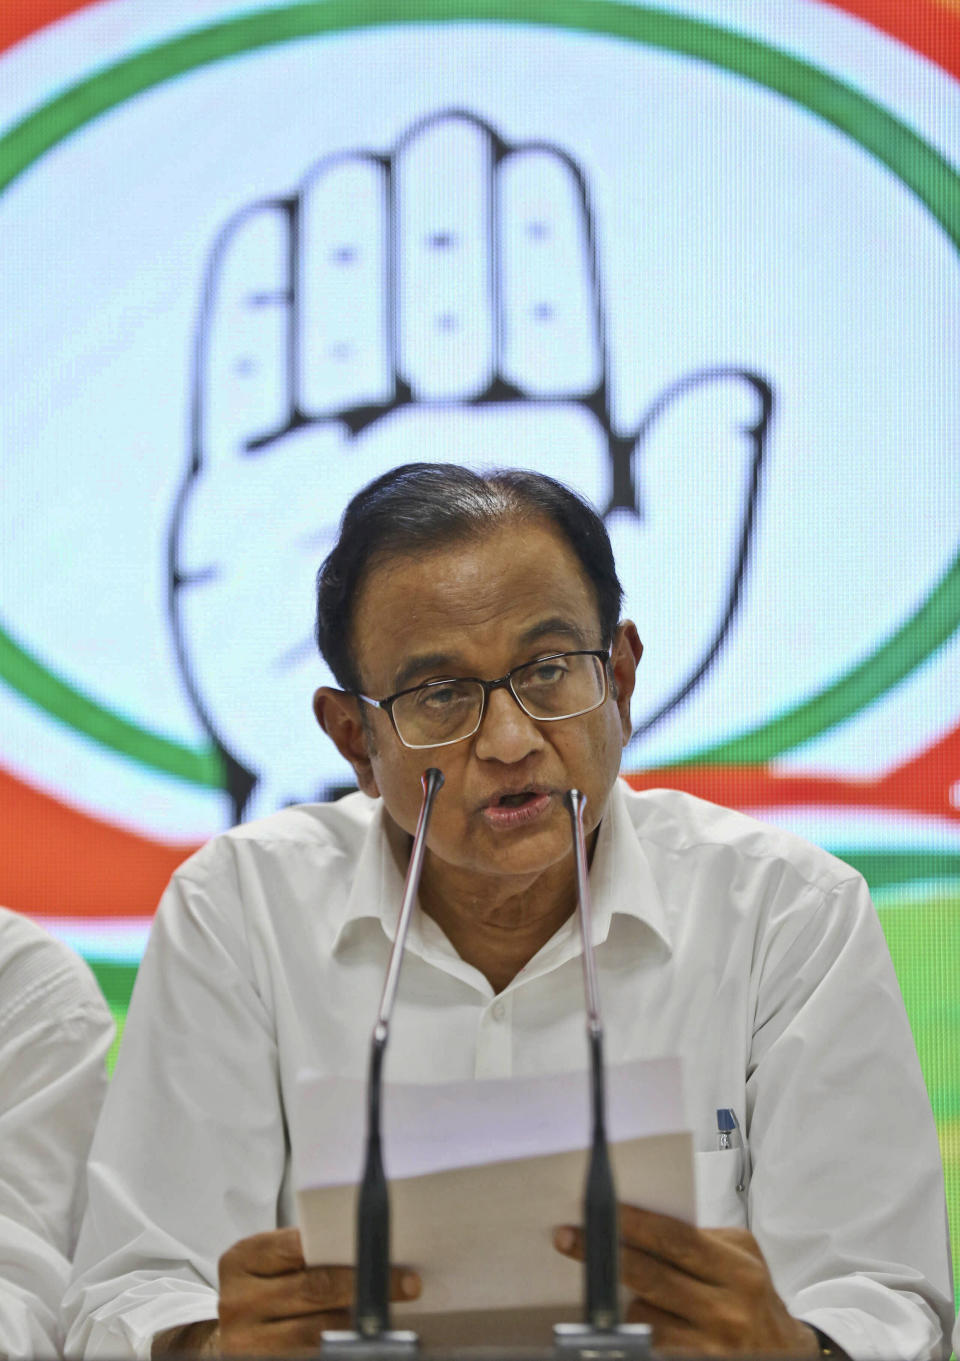 FILE - In this Wednesday, Aug. 21, 2019, file photo, Congress party leader and former Indian finance minister P. Chidambaram addresses the media at the party headquarters in New Delhi, India. The current state of India’s main opposition Congress party is so dire, a senior party leader says it is losing so many members and support it may not be able to win upcoming state elections or ensure its own future. Top party leader Chidambaram has been arrested for alleged economic offenses by the Modi government, adding woes to the party. (AP Photo)